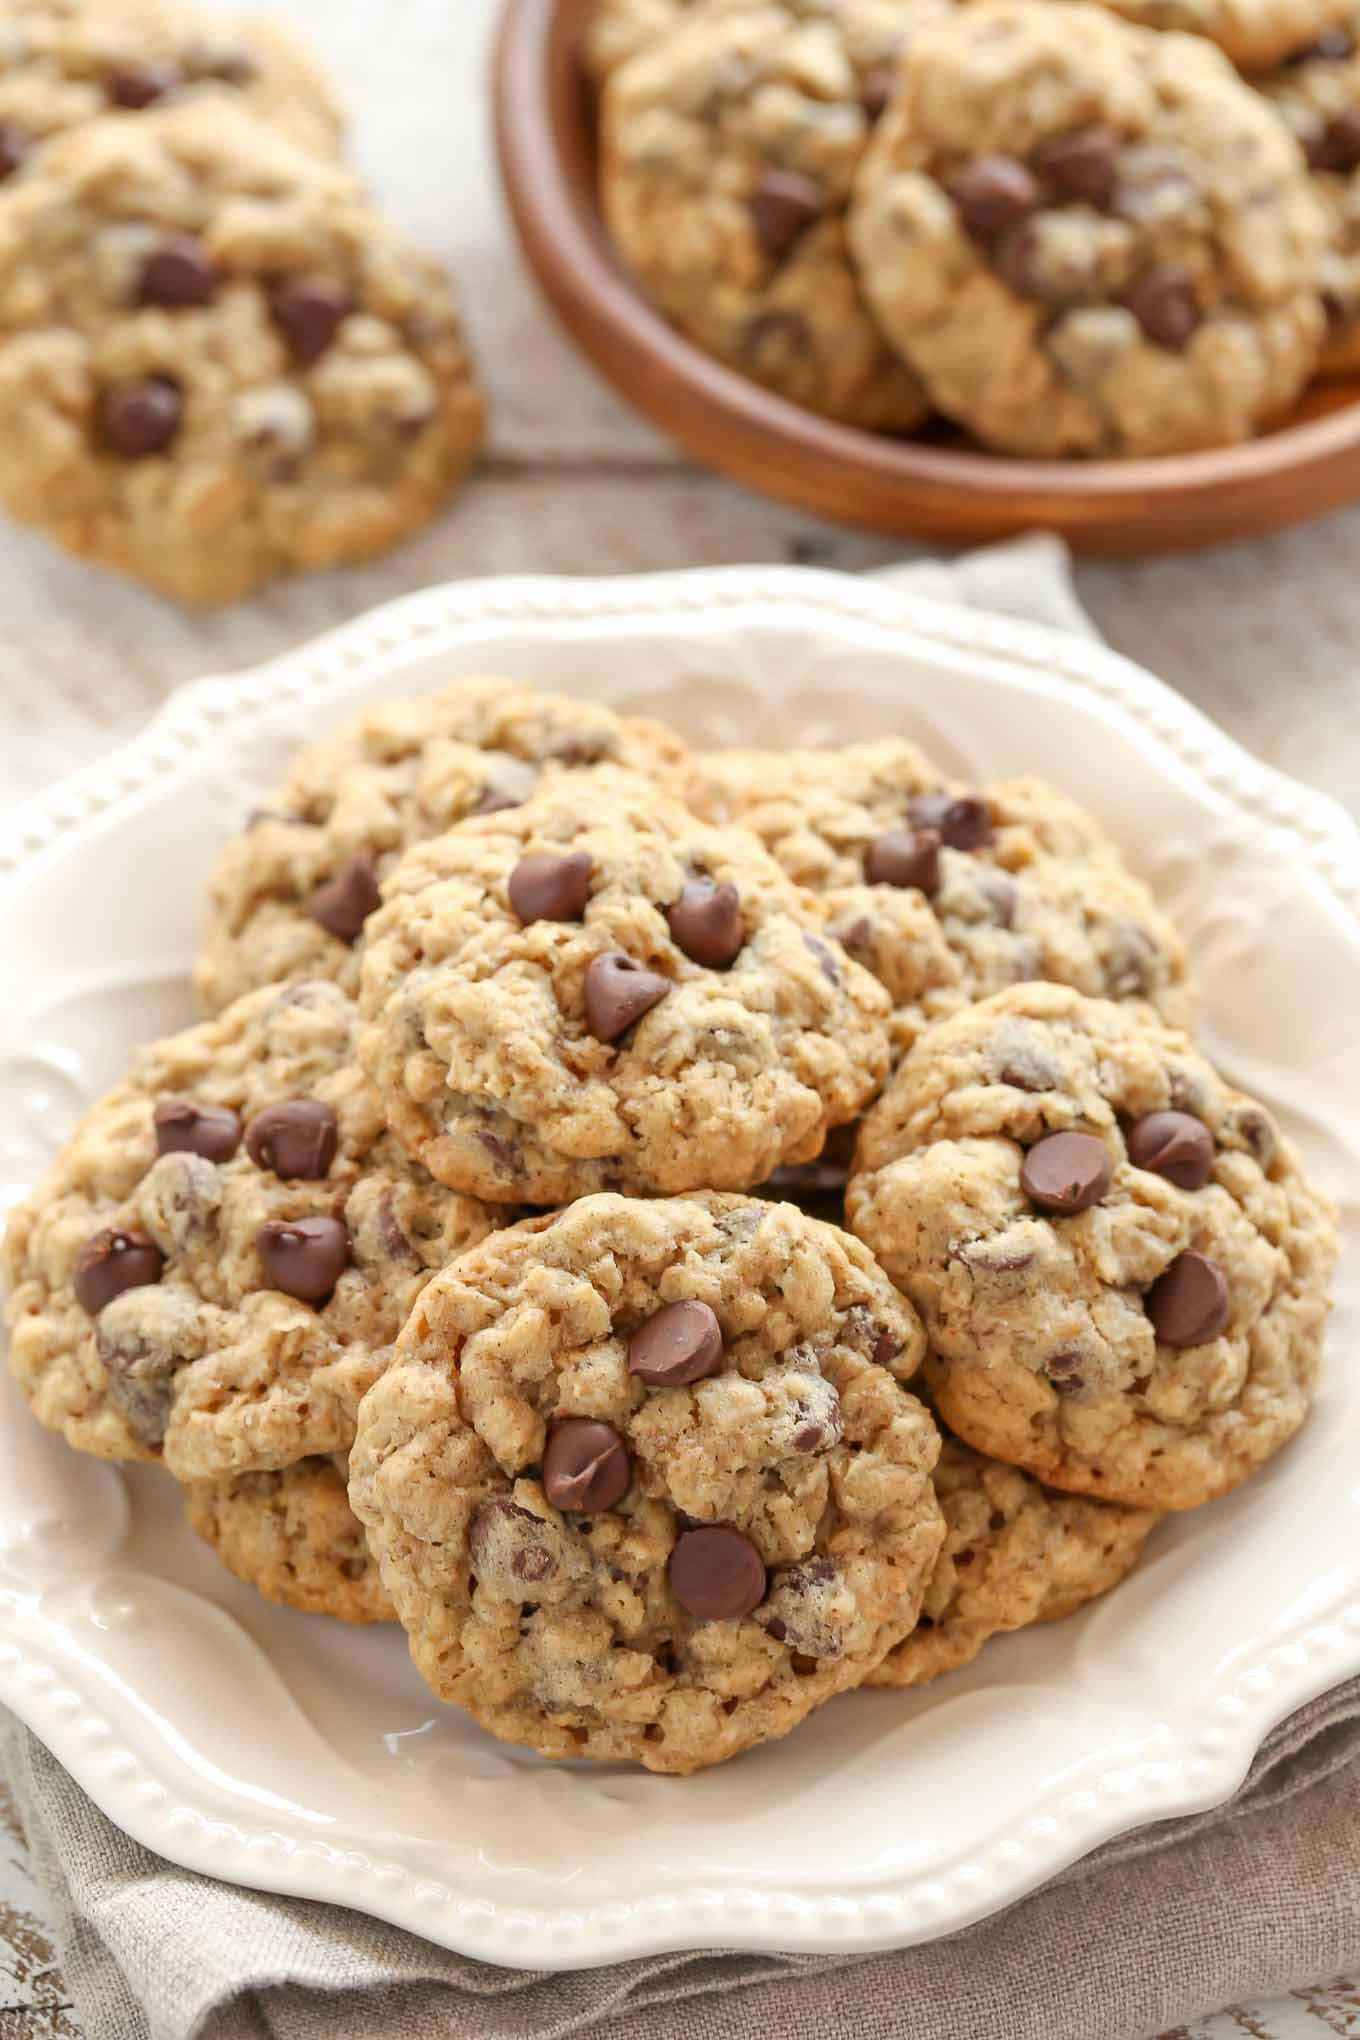 Oatmeal Cookies Recipes
 Soft and Chewy Oatmeal Chocolate Chip Cookies Live Well